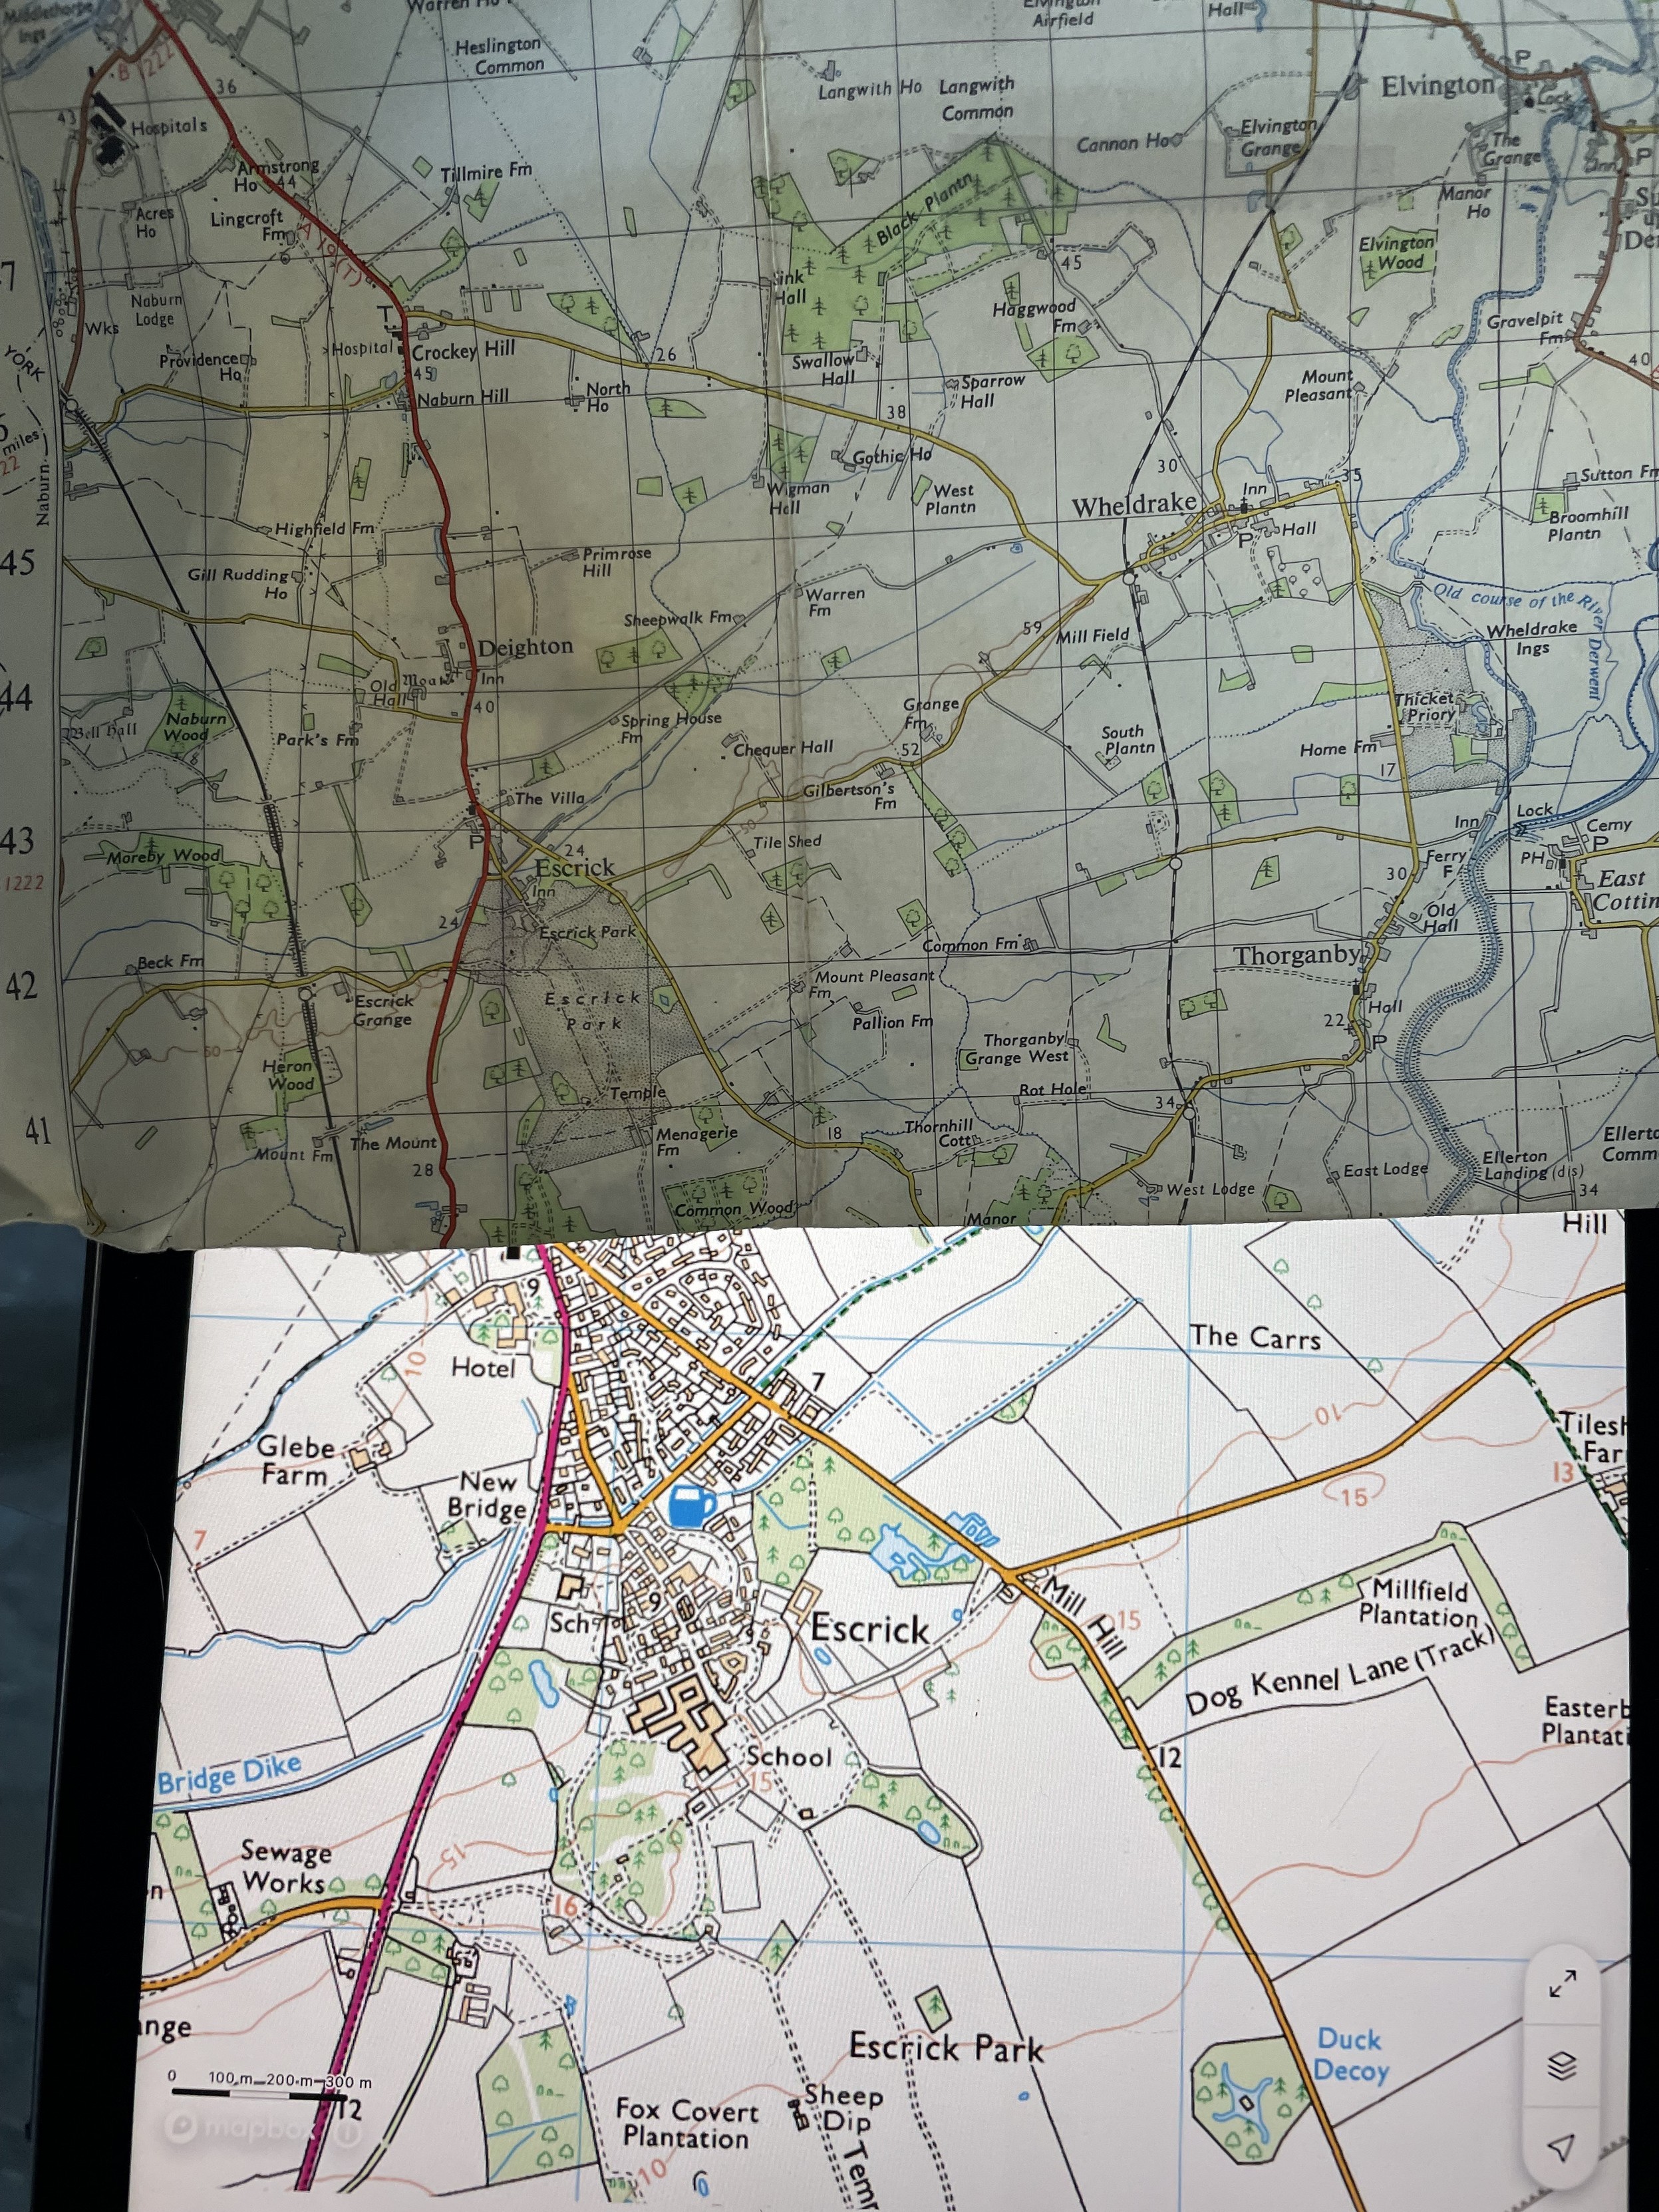 Top: paper map, showing a region south of York, probably sometime in the 1960s.
Bottom: latest digital view of the same region (showing a village expanding, differing fonts, colour changes on the map).